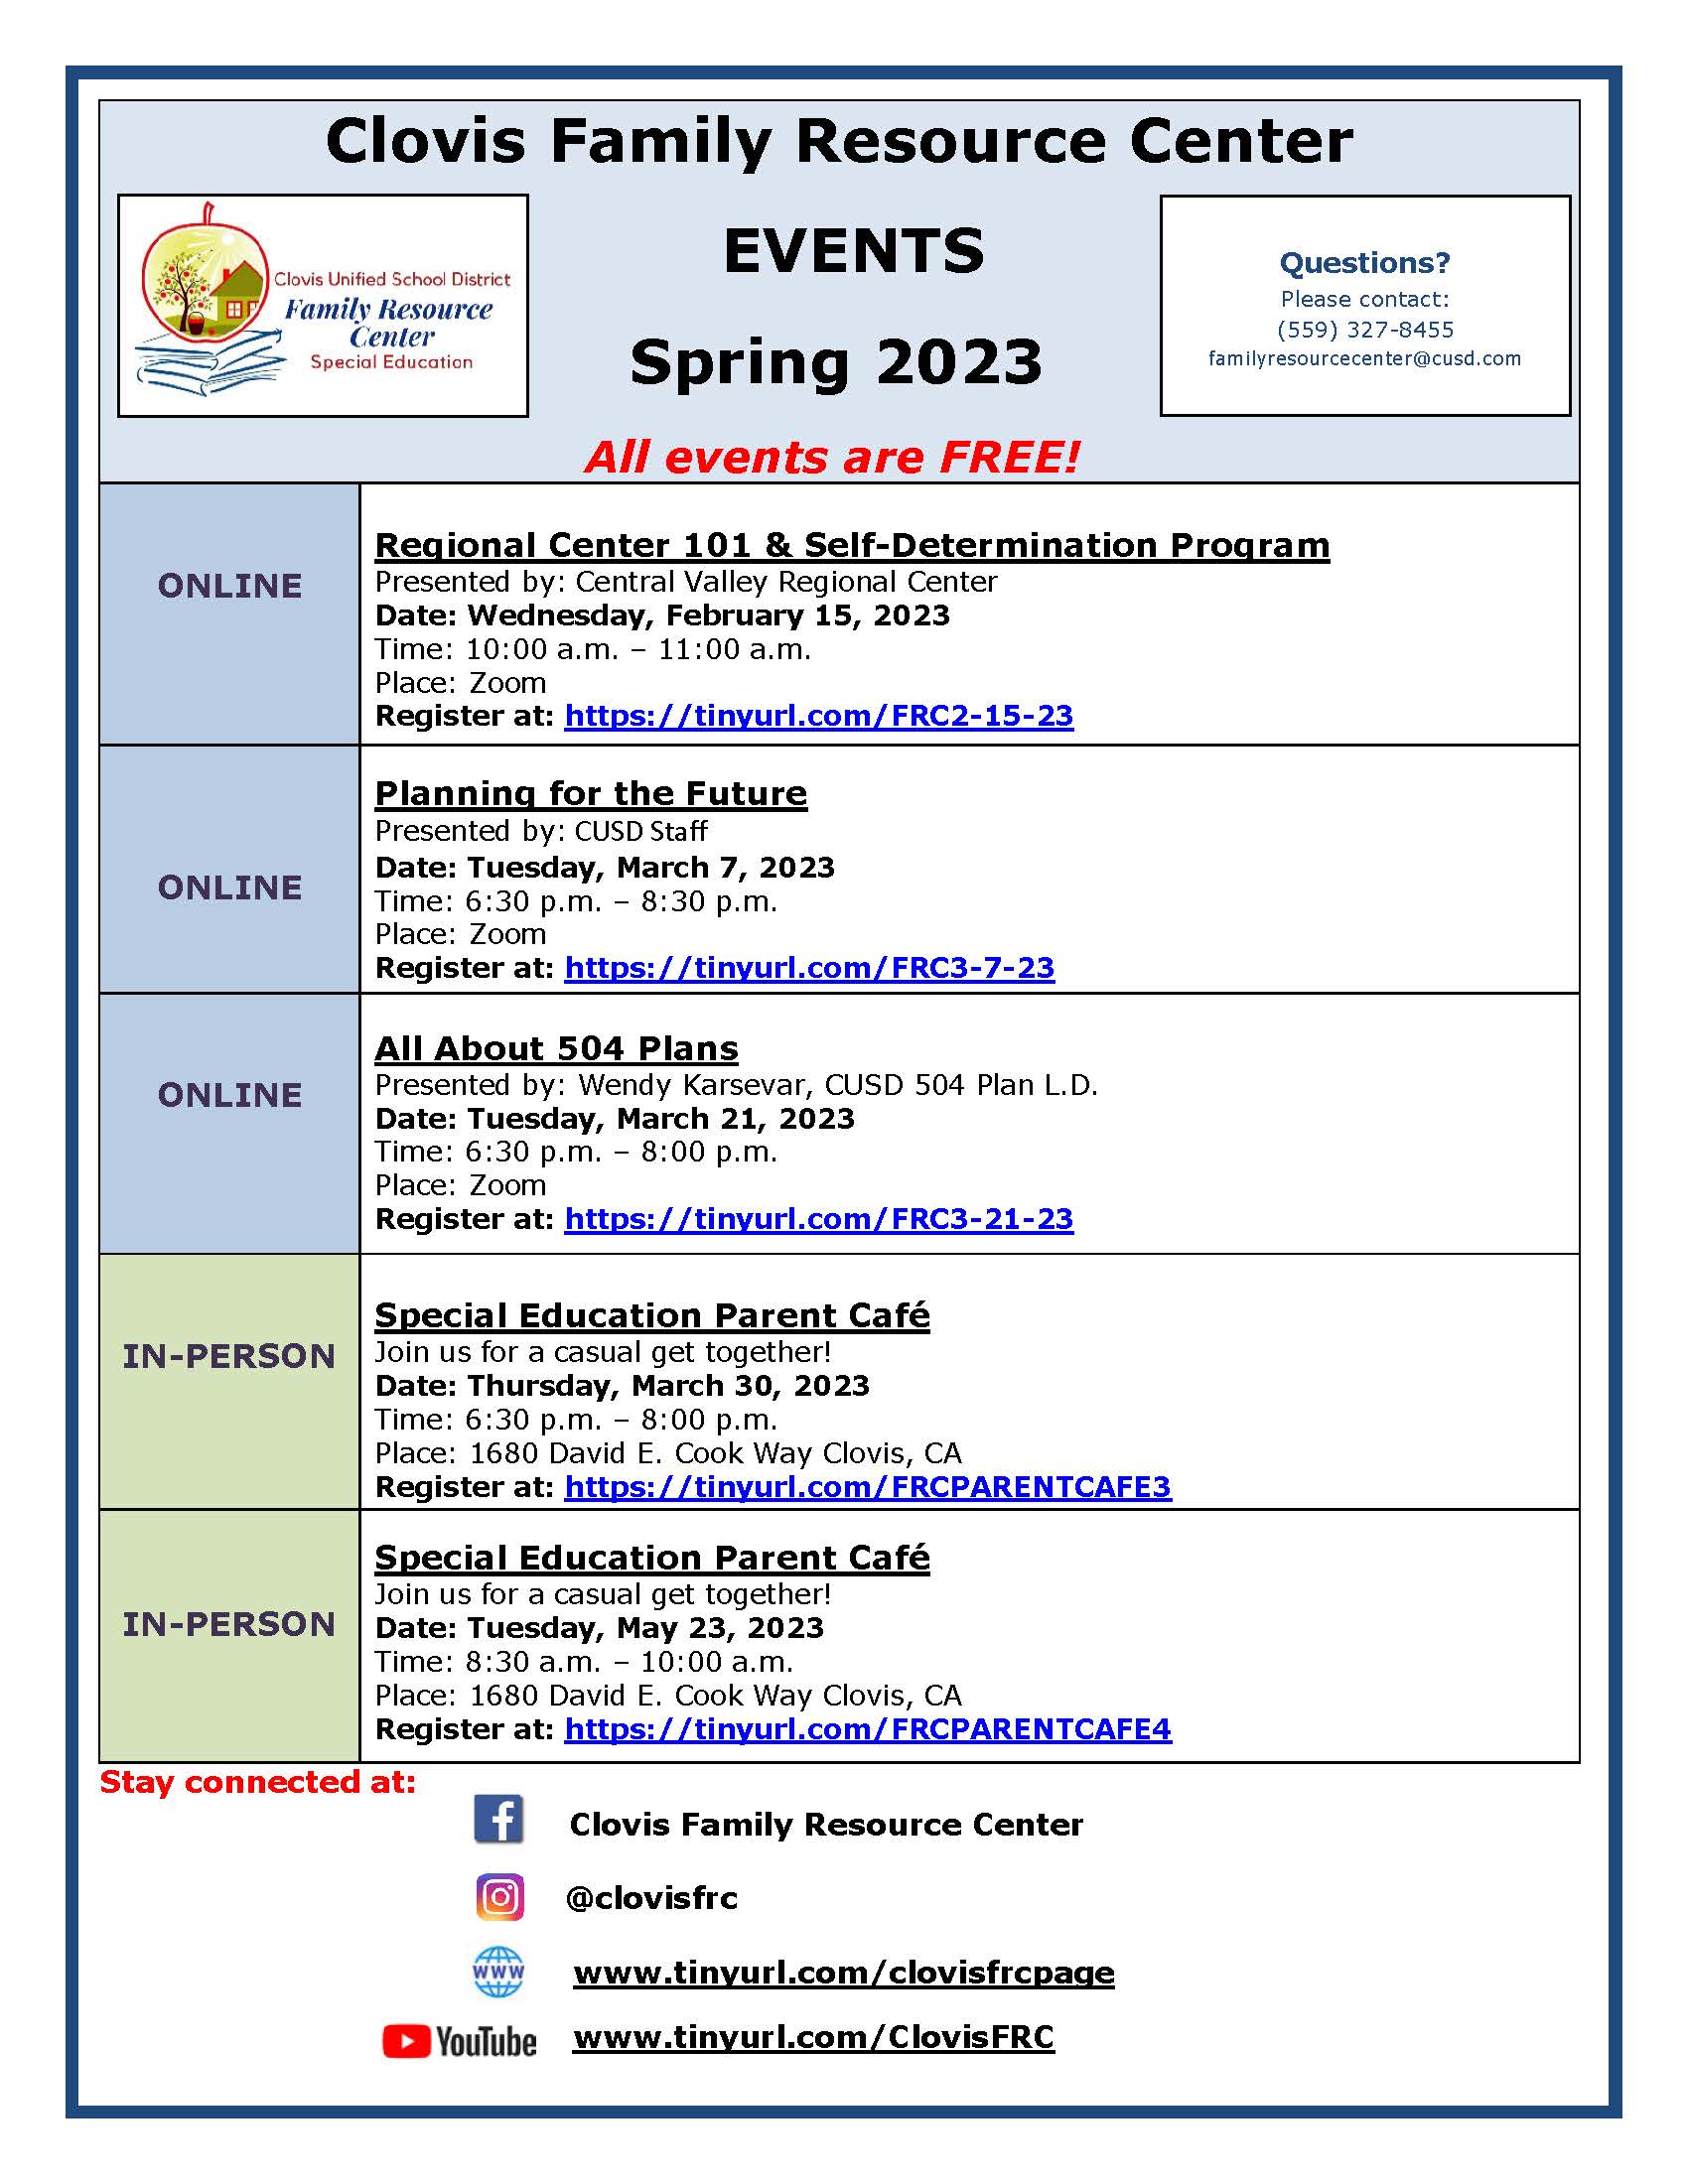 Image of Spring 2023 FRC events calendar. RTF version available for download on the right-hand side of this page.